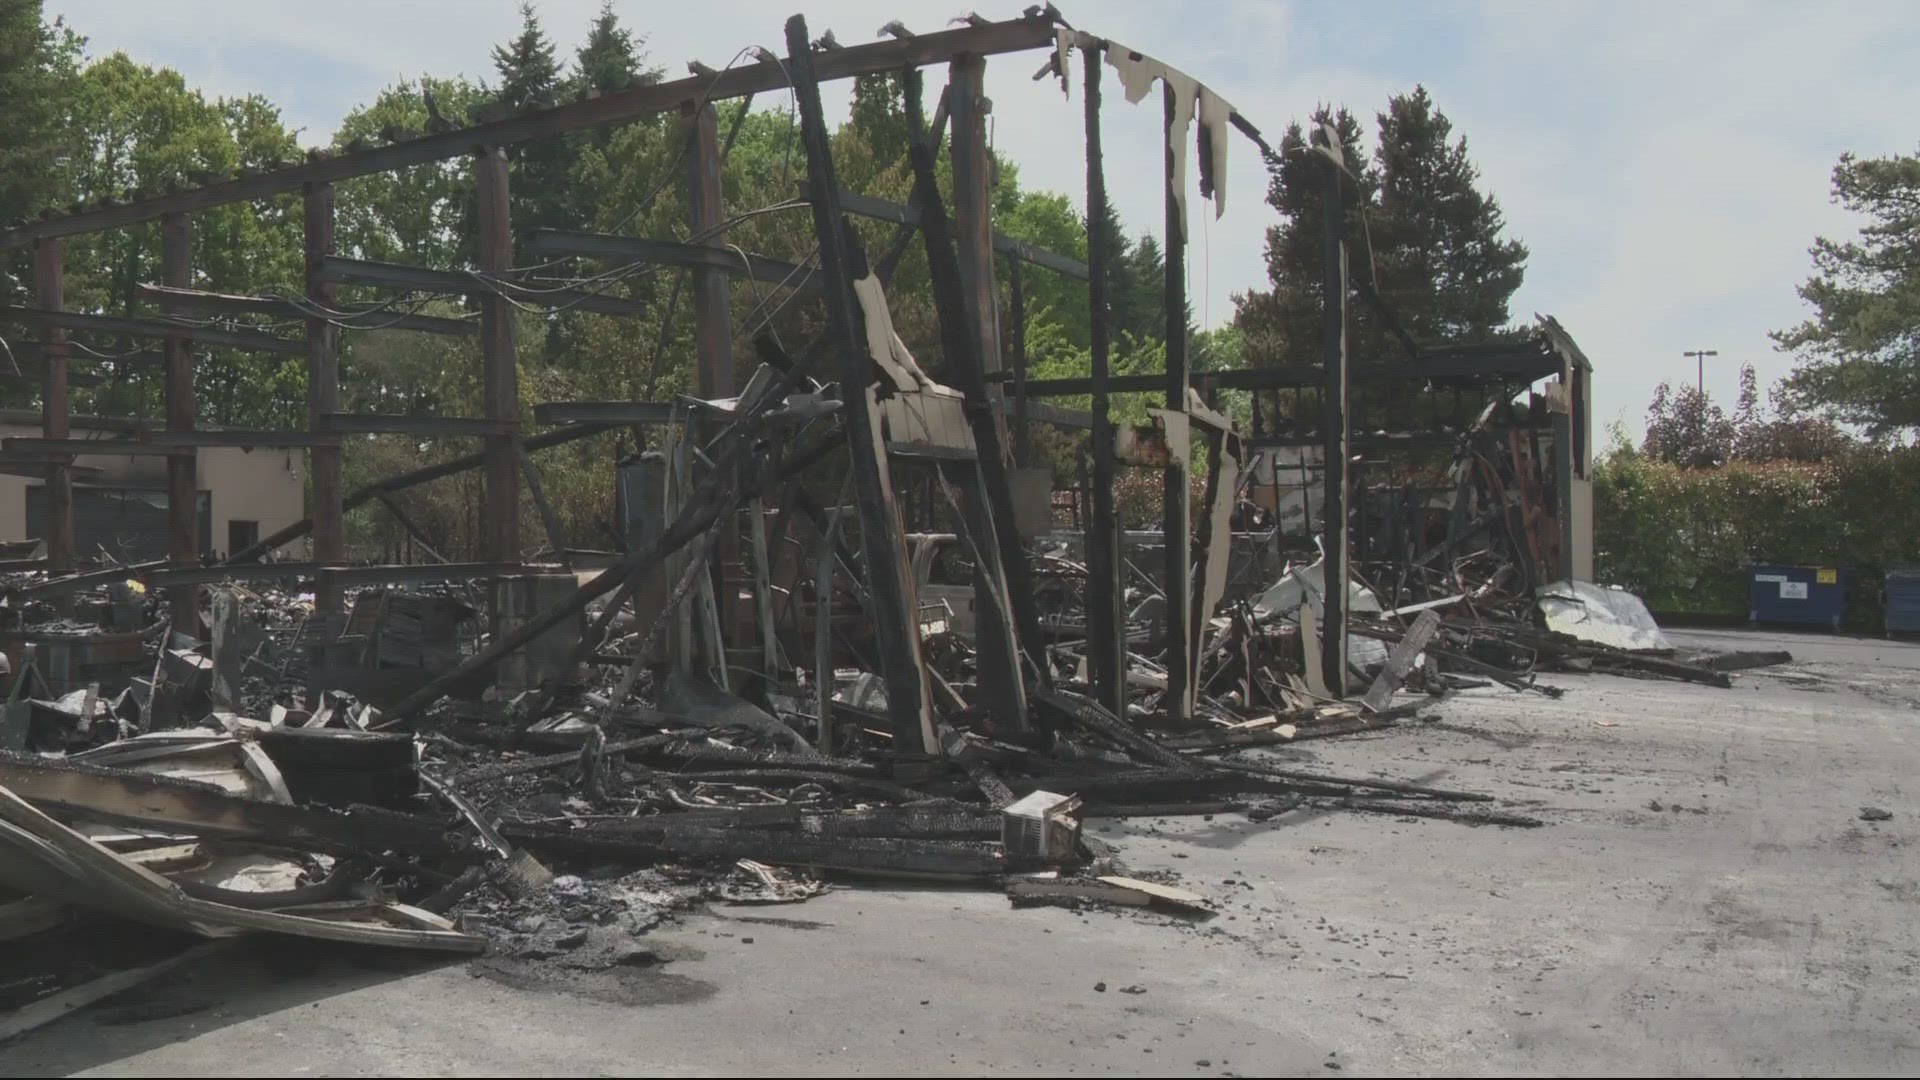 The shared commercial building in a business park in Salmon Creek was fully engulfed in flames when fire crews arrived.